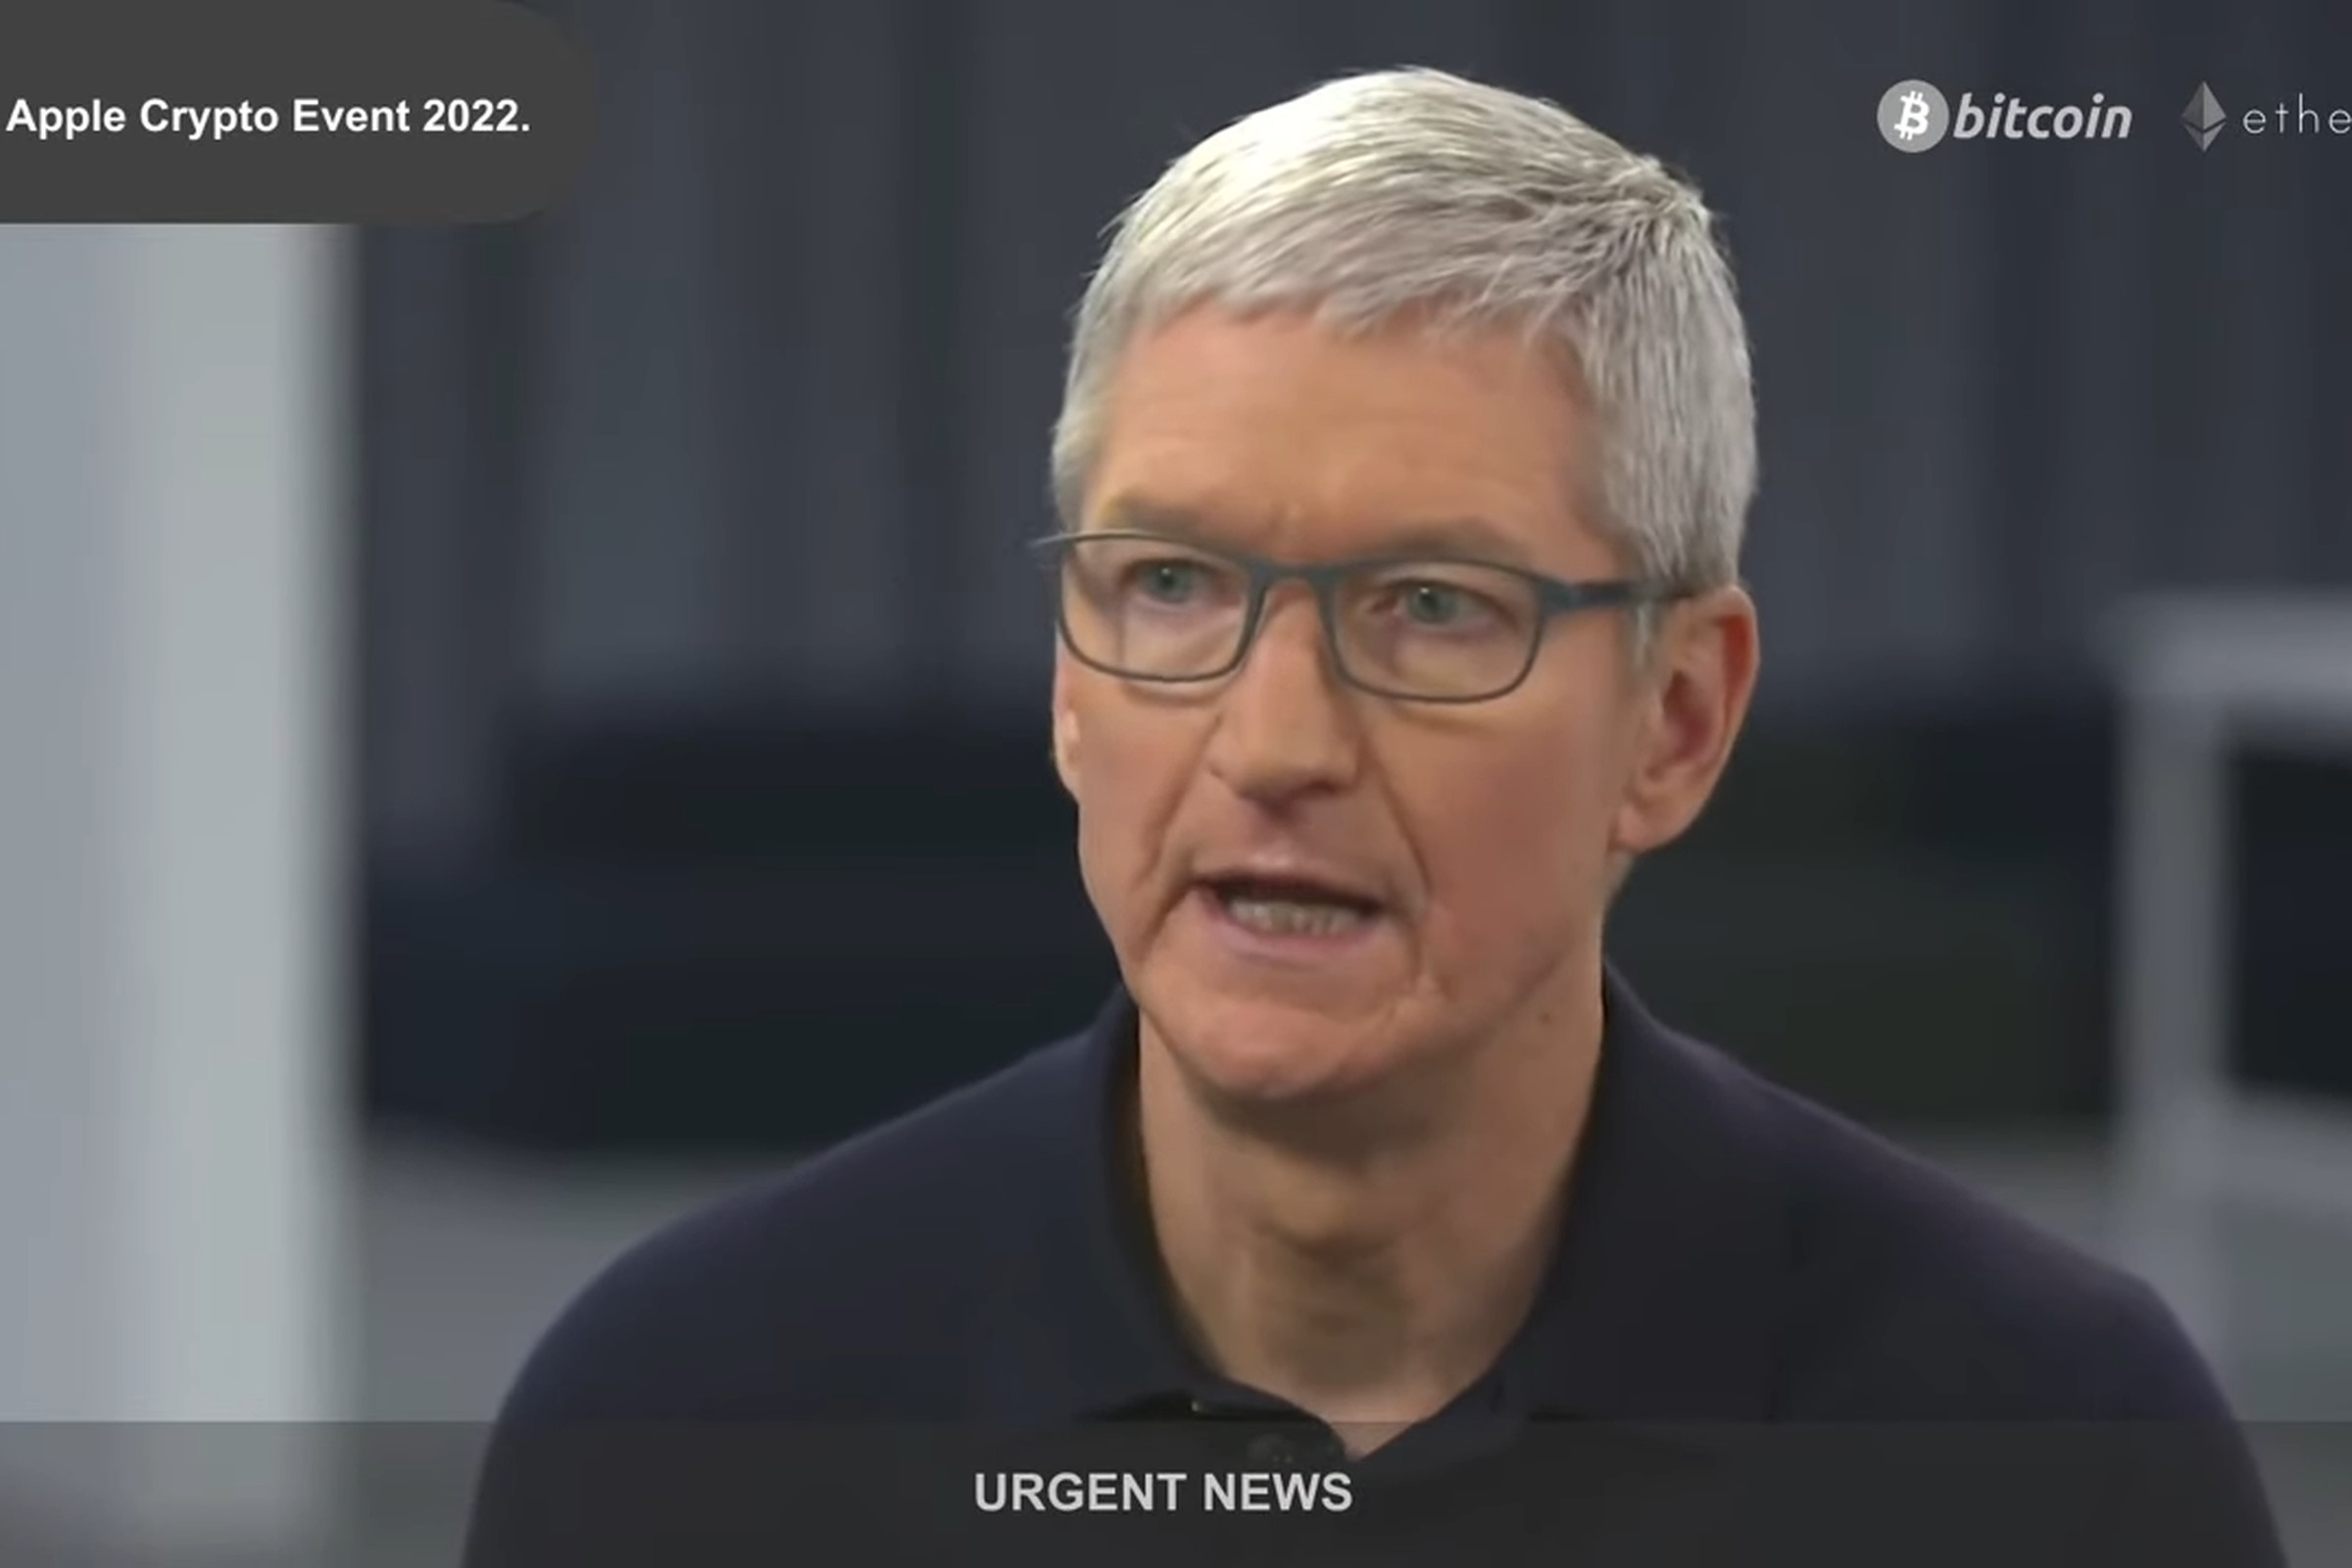 Tim Cook speaks in an interview. The logos for Bitcoin and Ethereum are in the top-right corner.